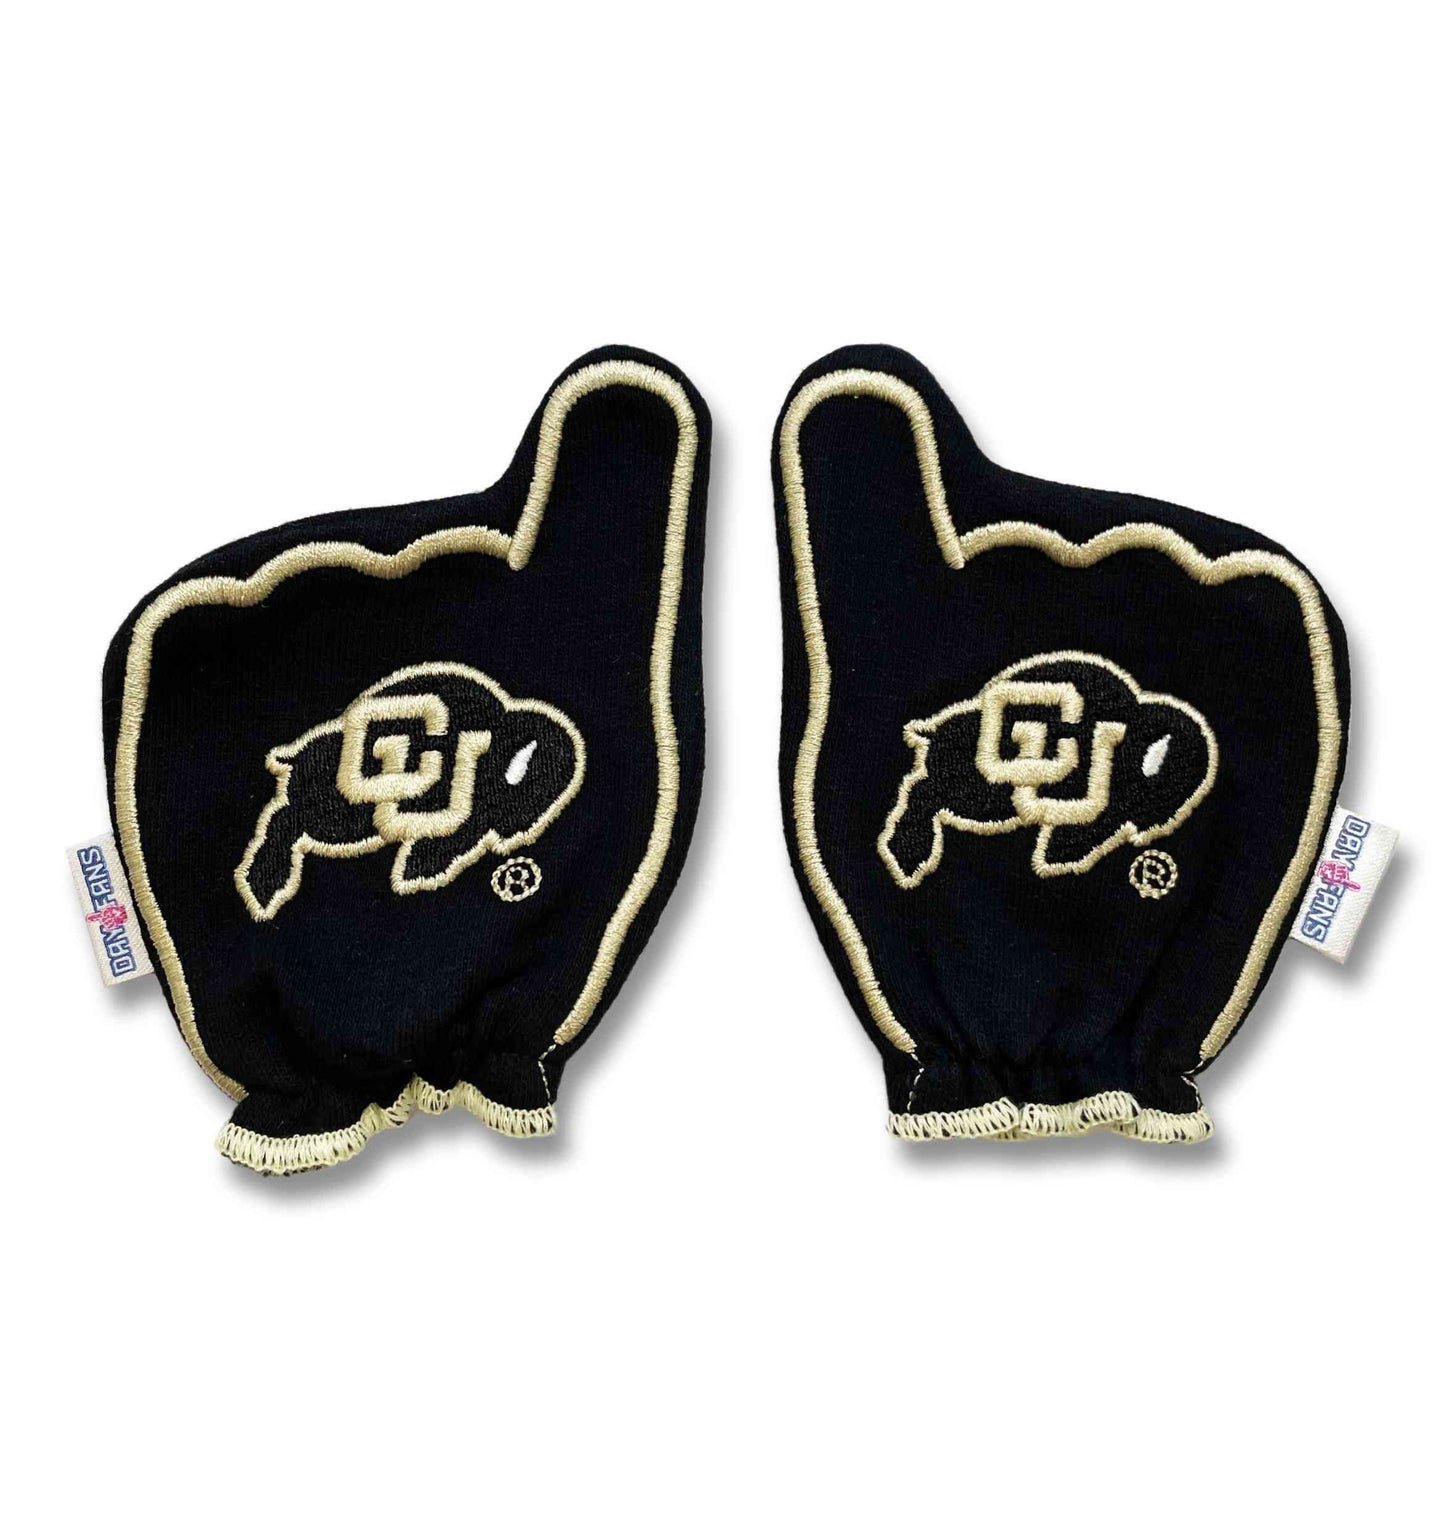 Colorado Go Buffs FanMitts Baby Mittens Black Back Pair